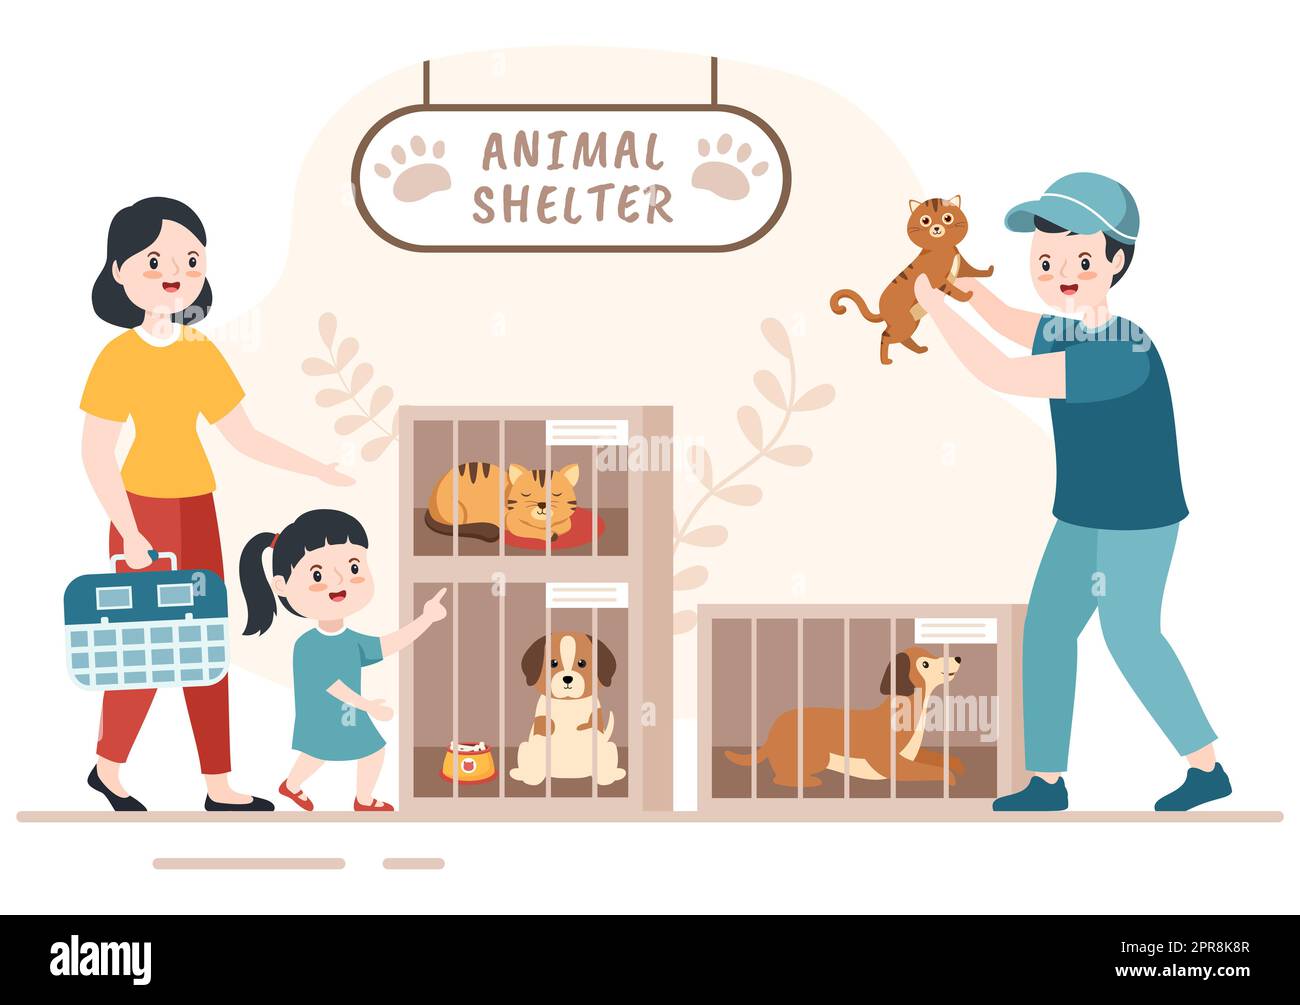 Animal Shelter Cartoon Illustration with Pets Sitting in Cages and Volunteers Feeding Animals for Adopting in Flat Hand Drawn Style Design Stock Photo